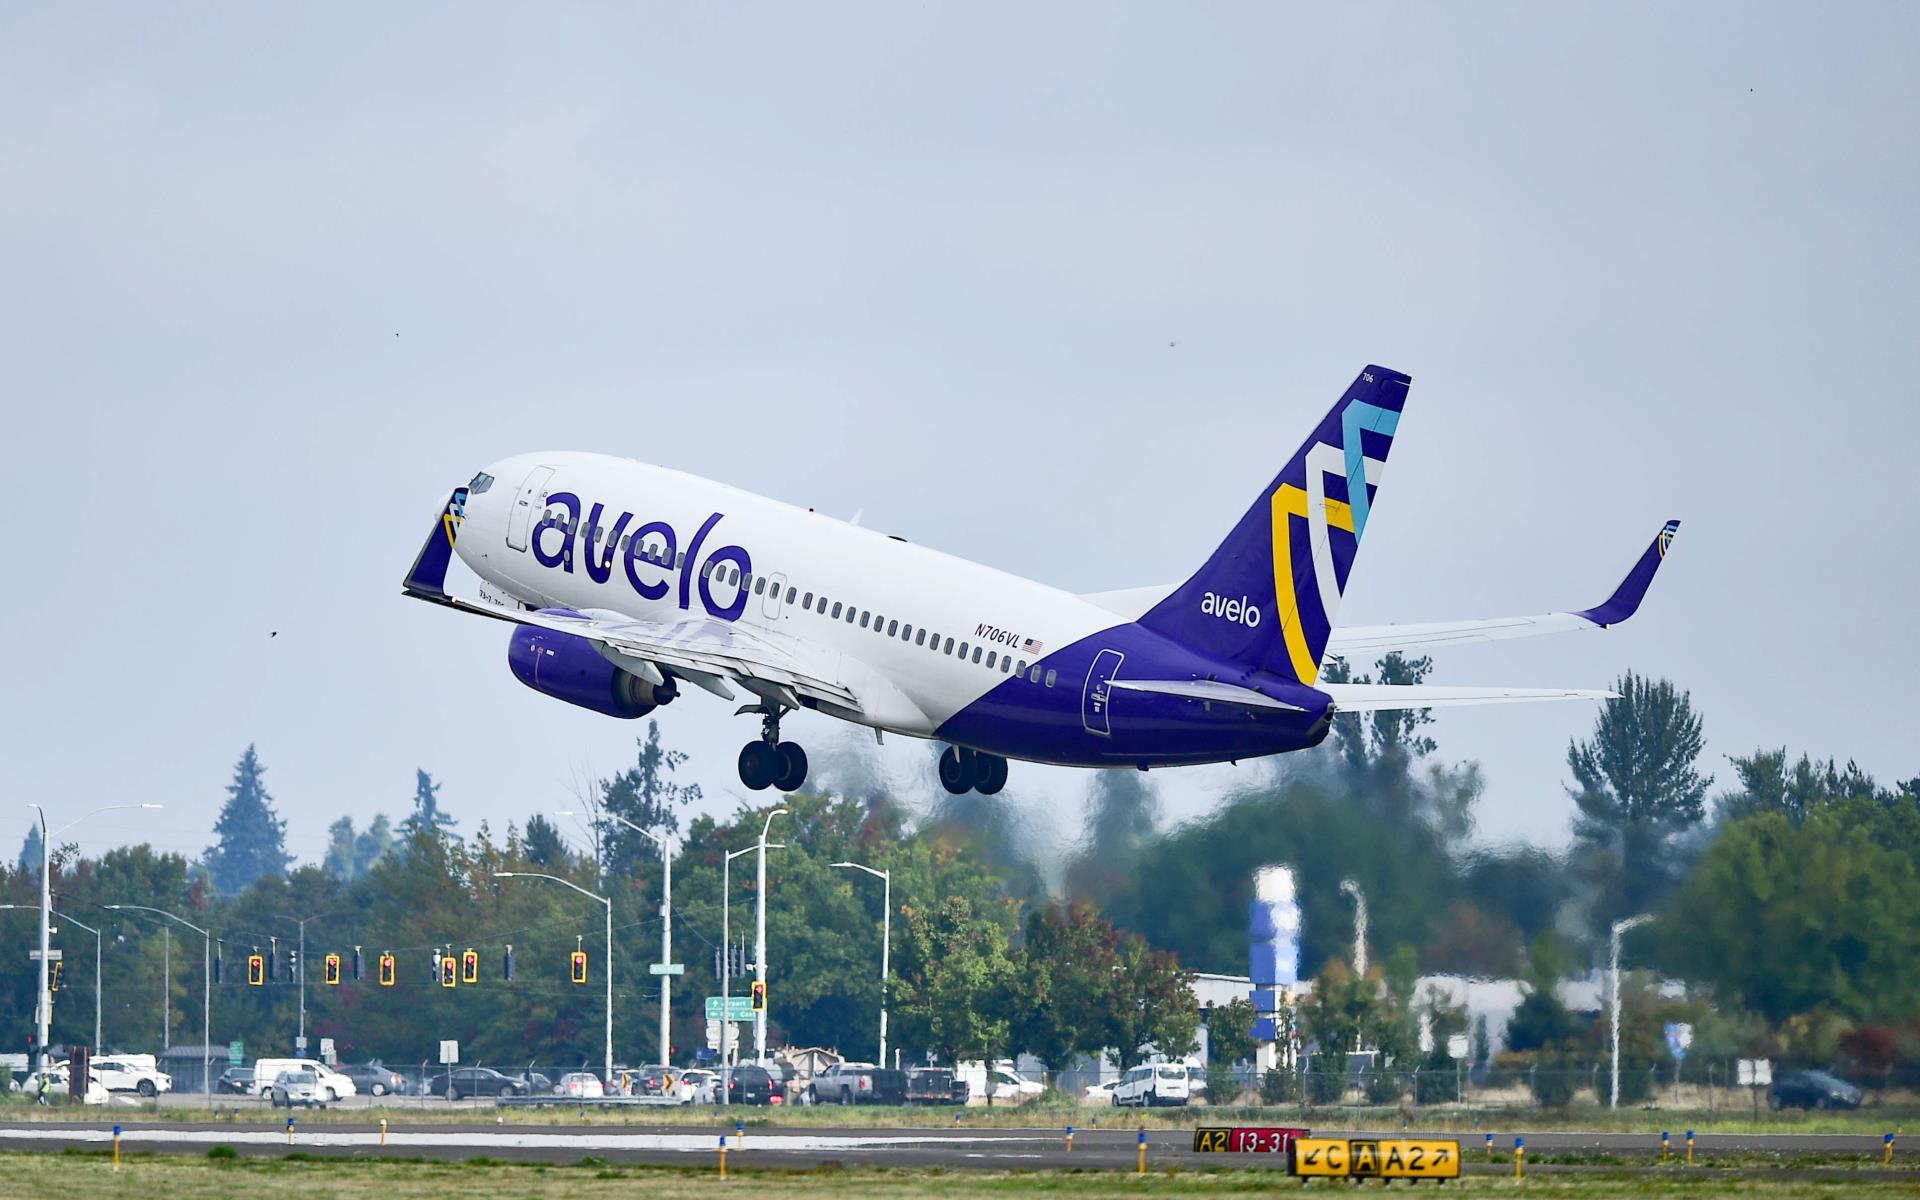 Avelo Airlines 737 on take off from SLE